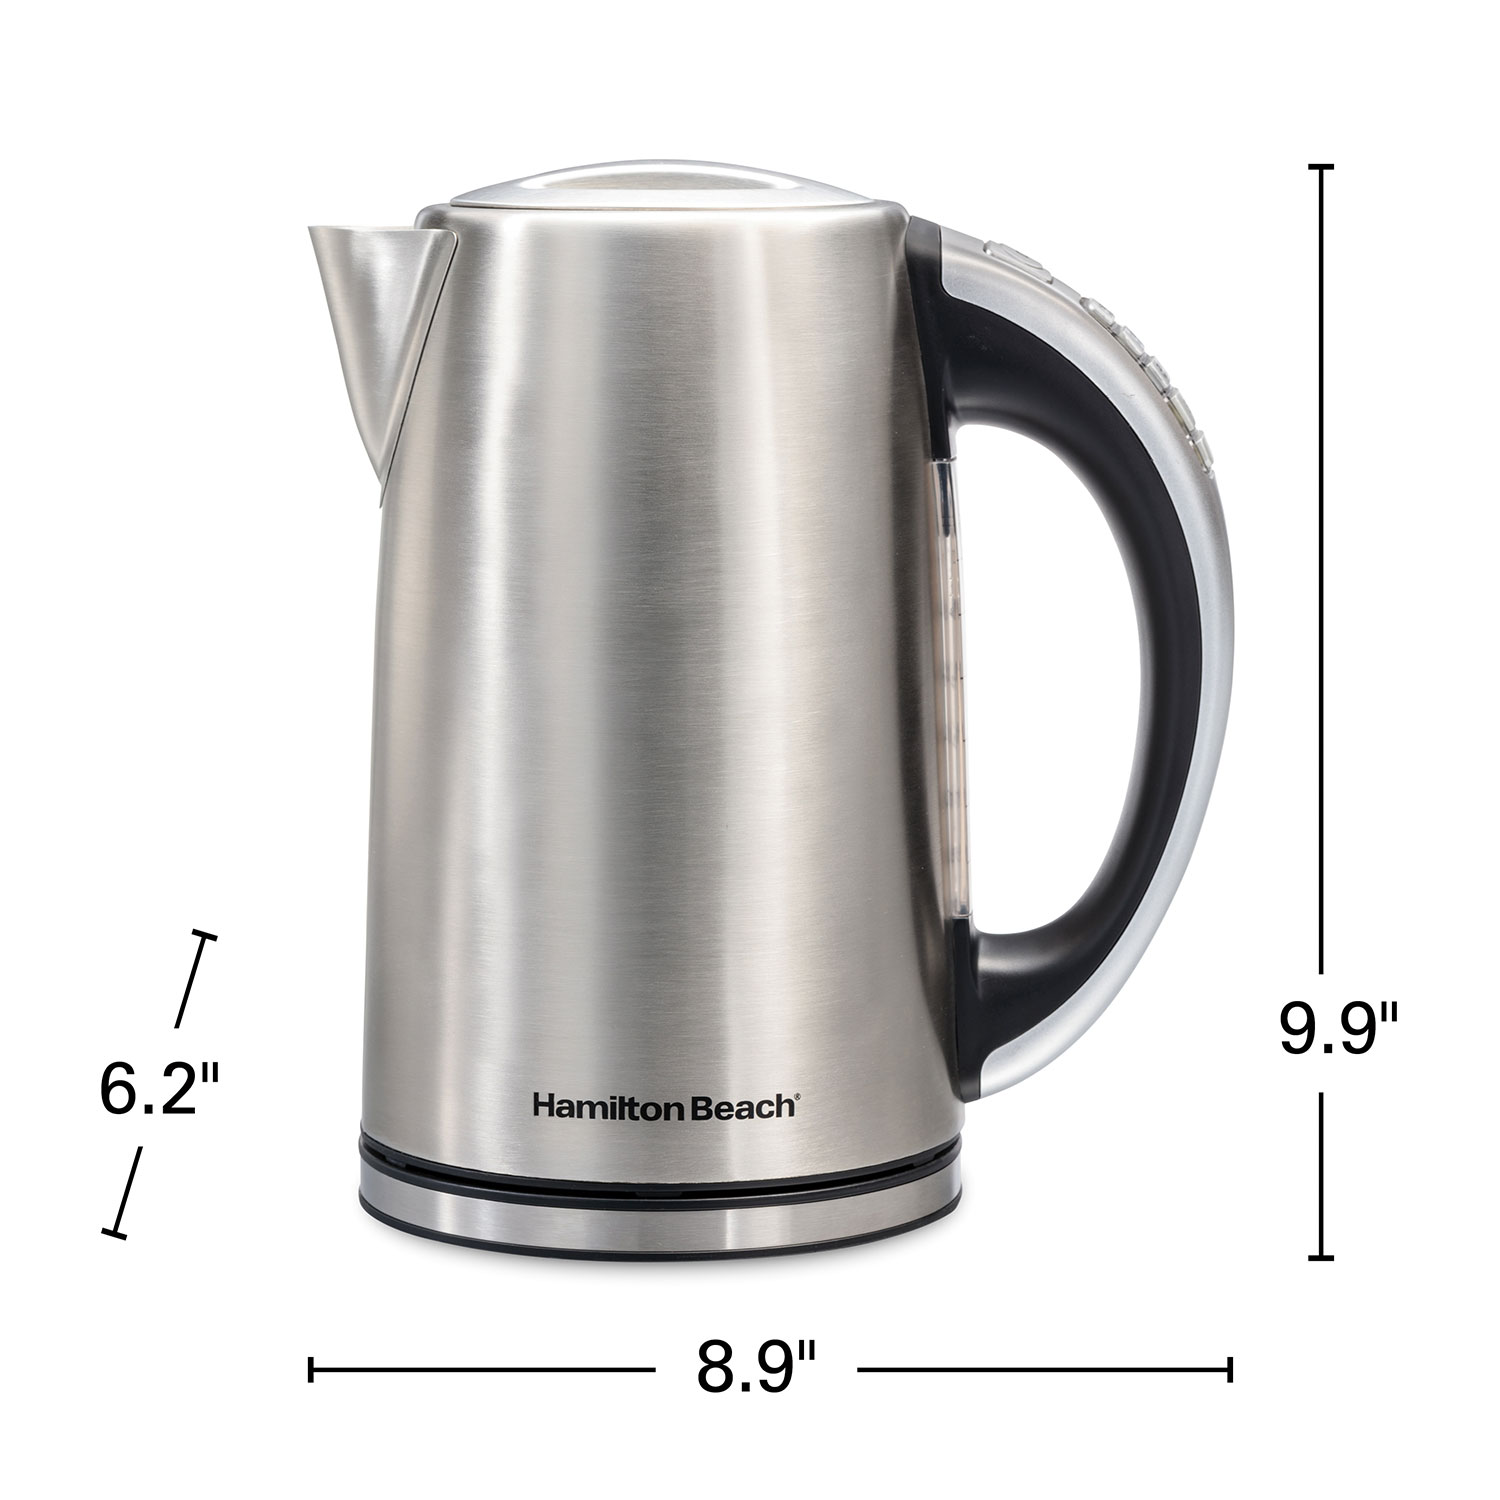 Hamilton Beach Variable Temperature Electric Kettle, Stainless